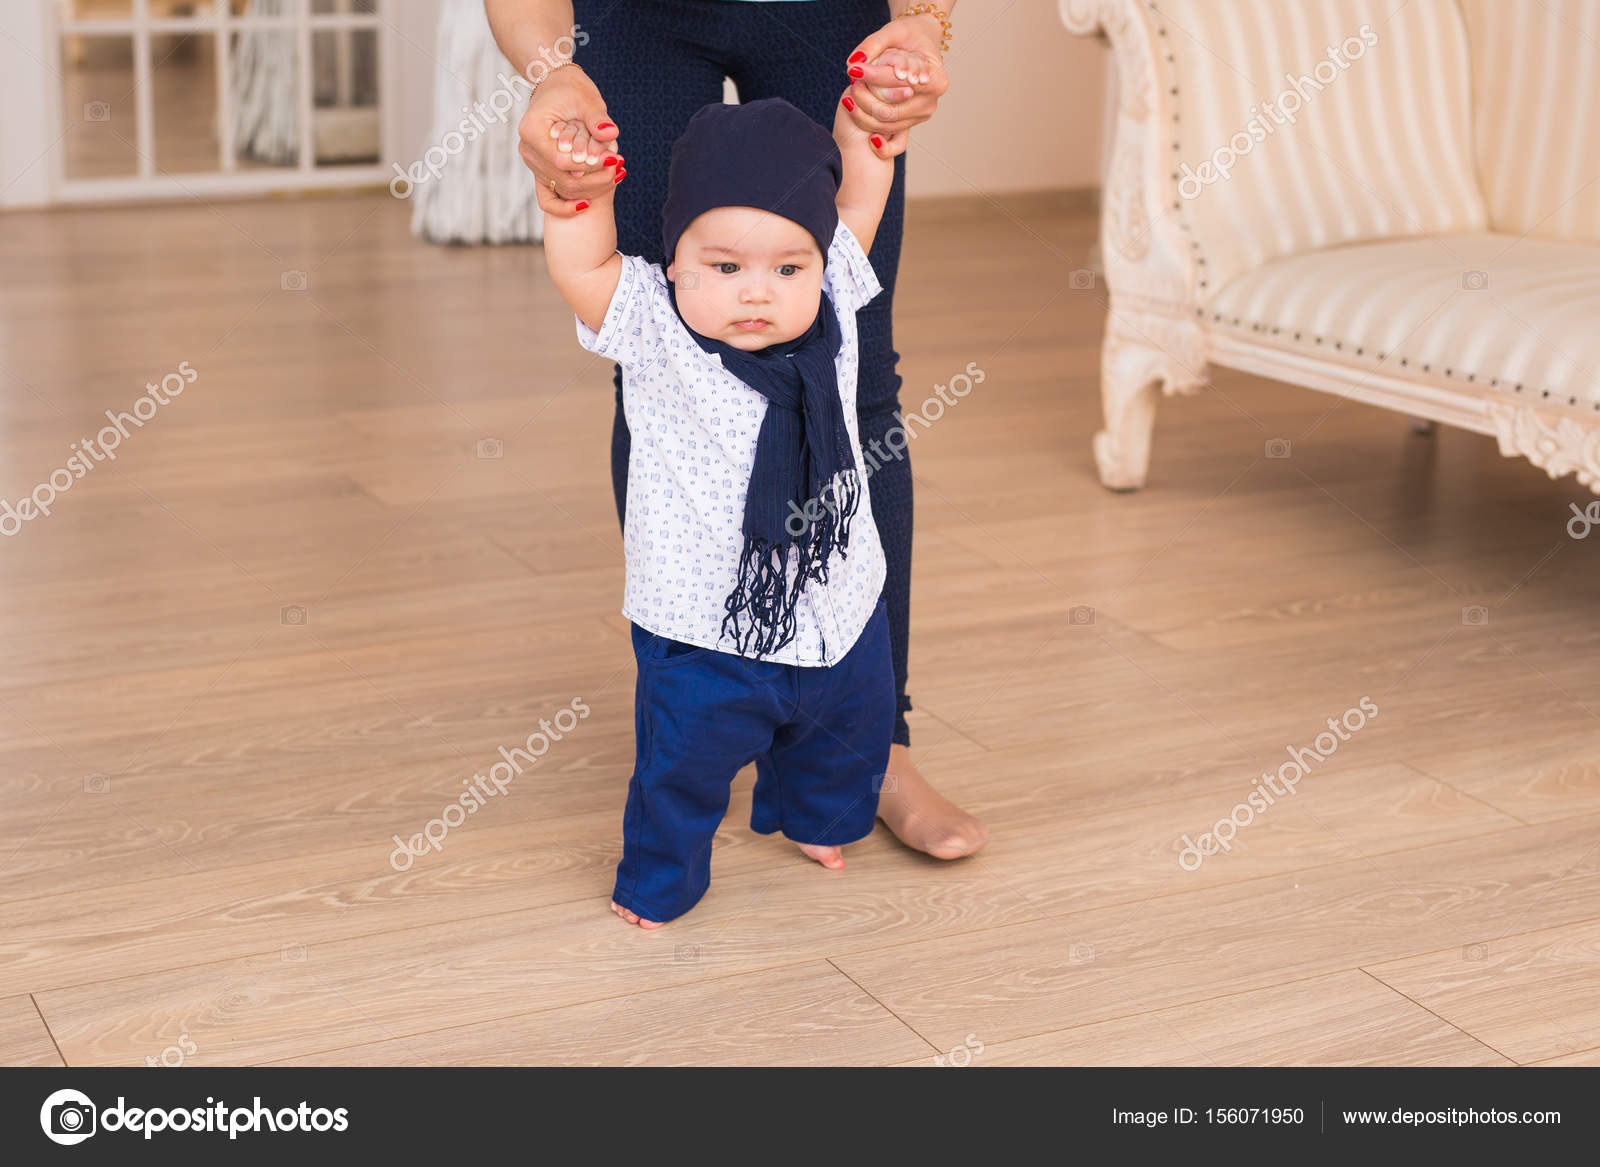 Baby Taking First Steps With Mother Help Stock Photo C Satura